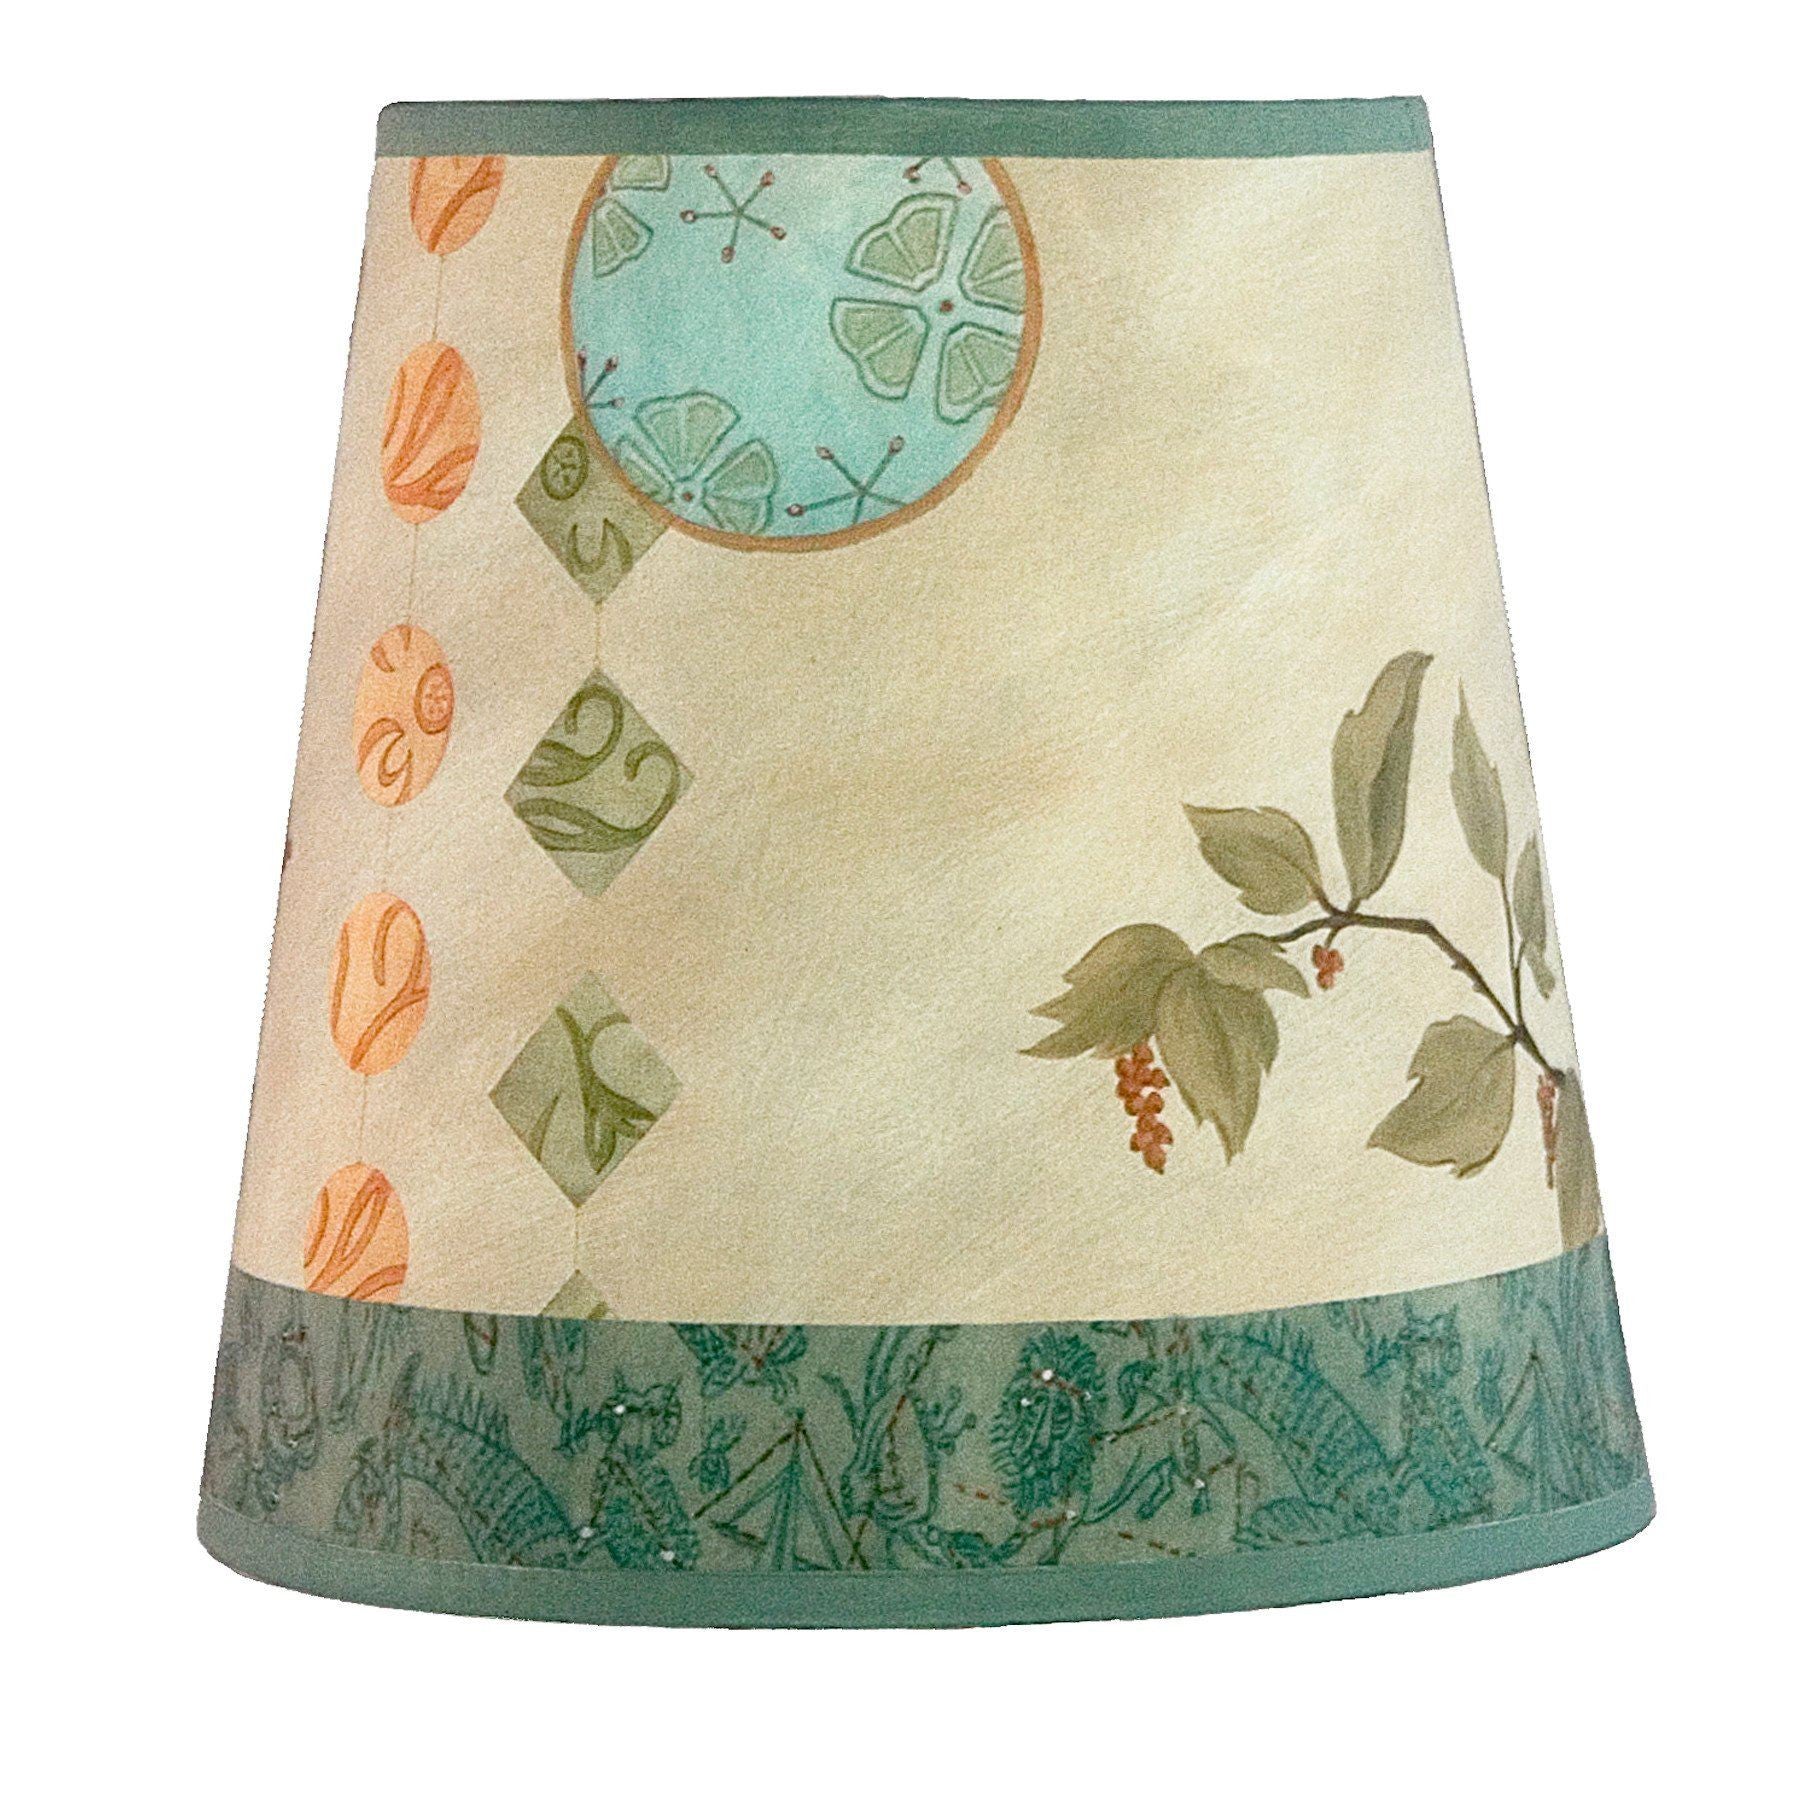 Janna Ugone & Co Lamp Shades Small Drum Lamp Shade in Celestial Leaf